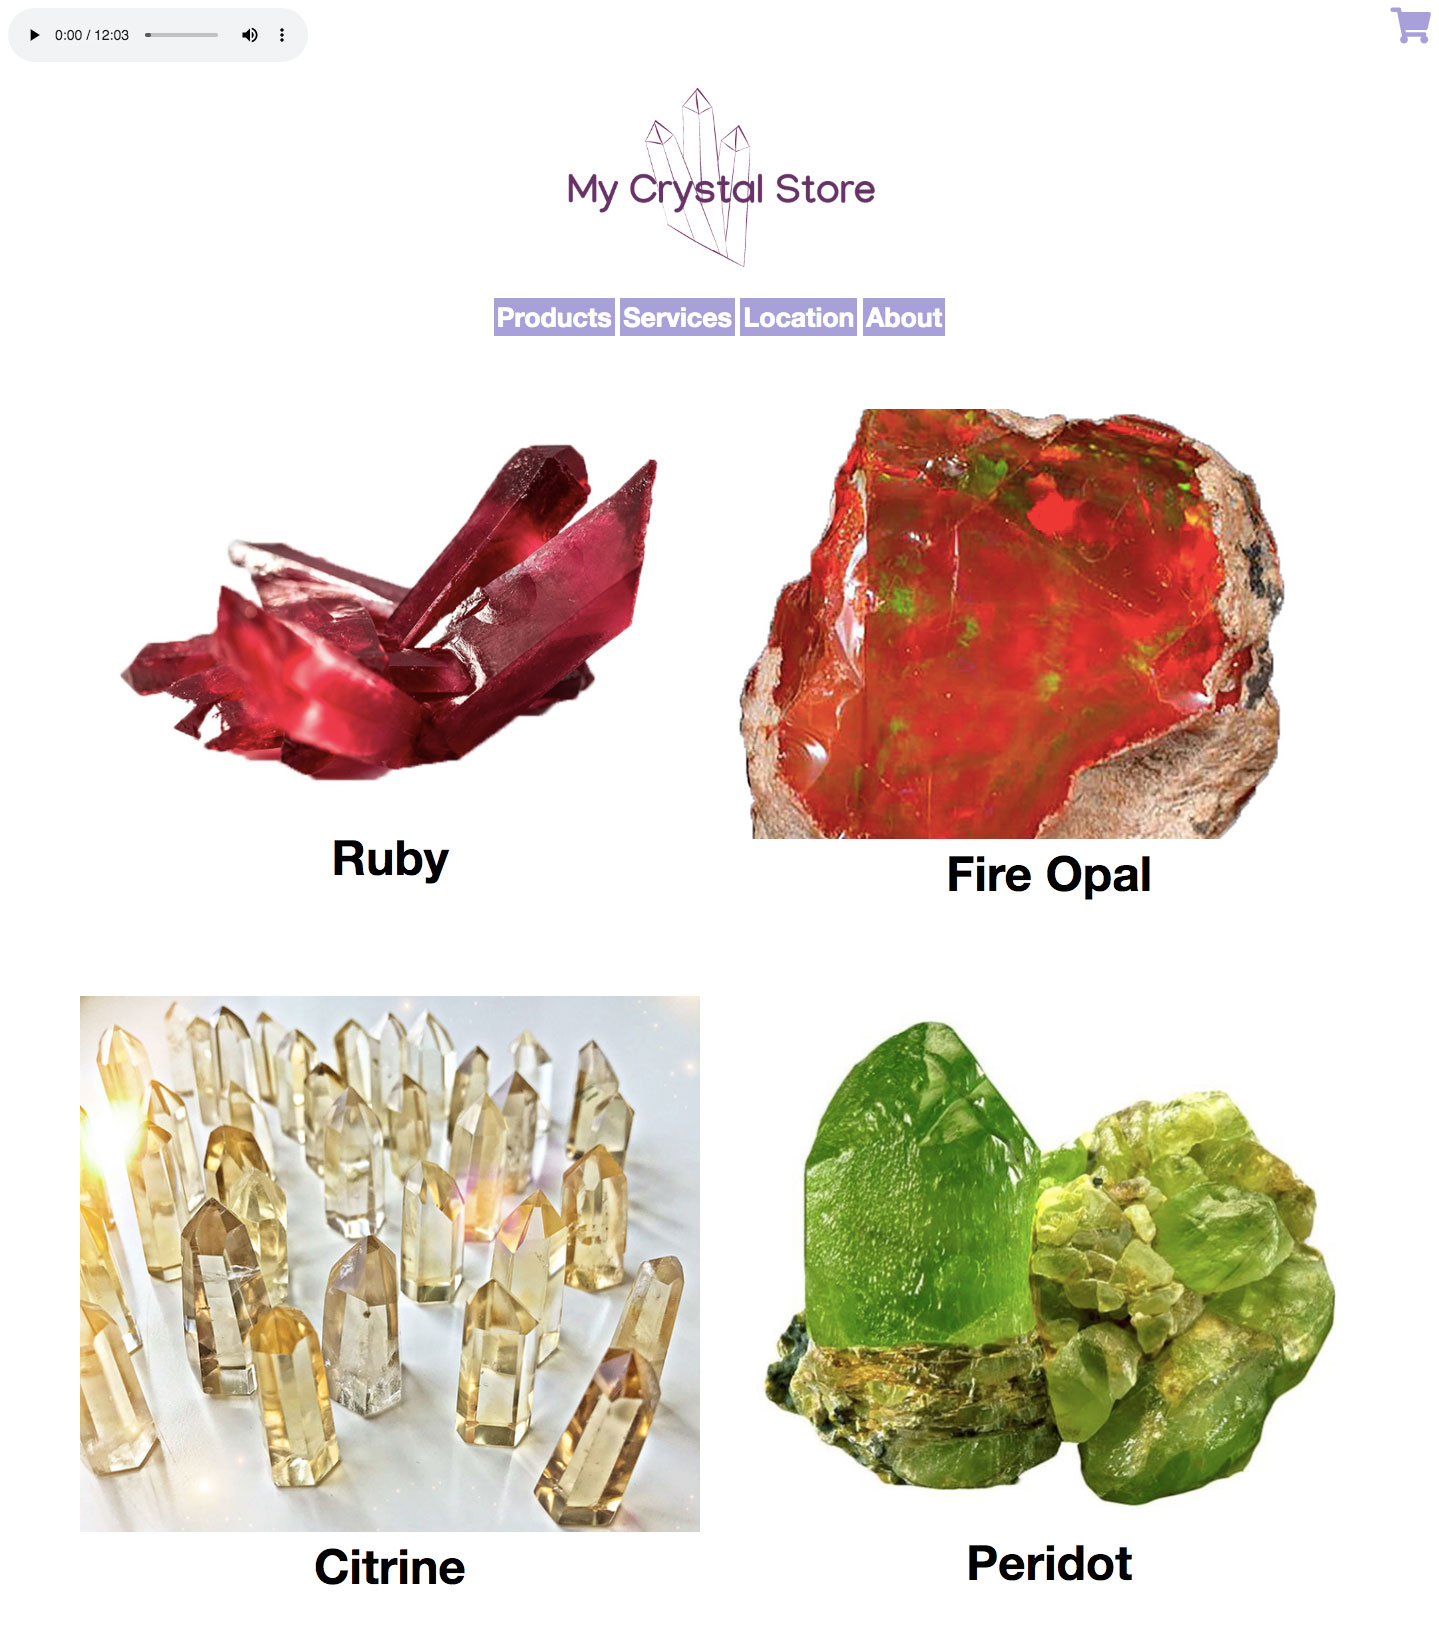 My Crystal Store